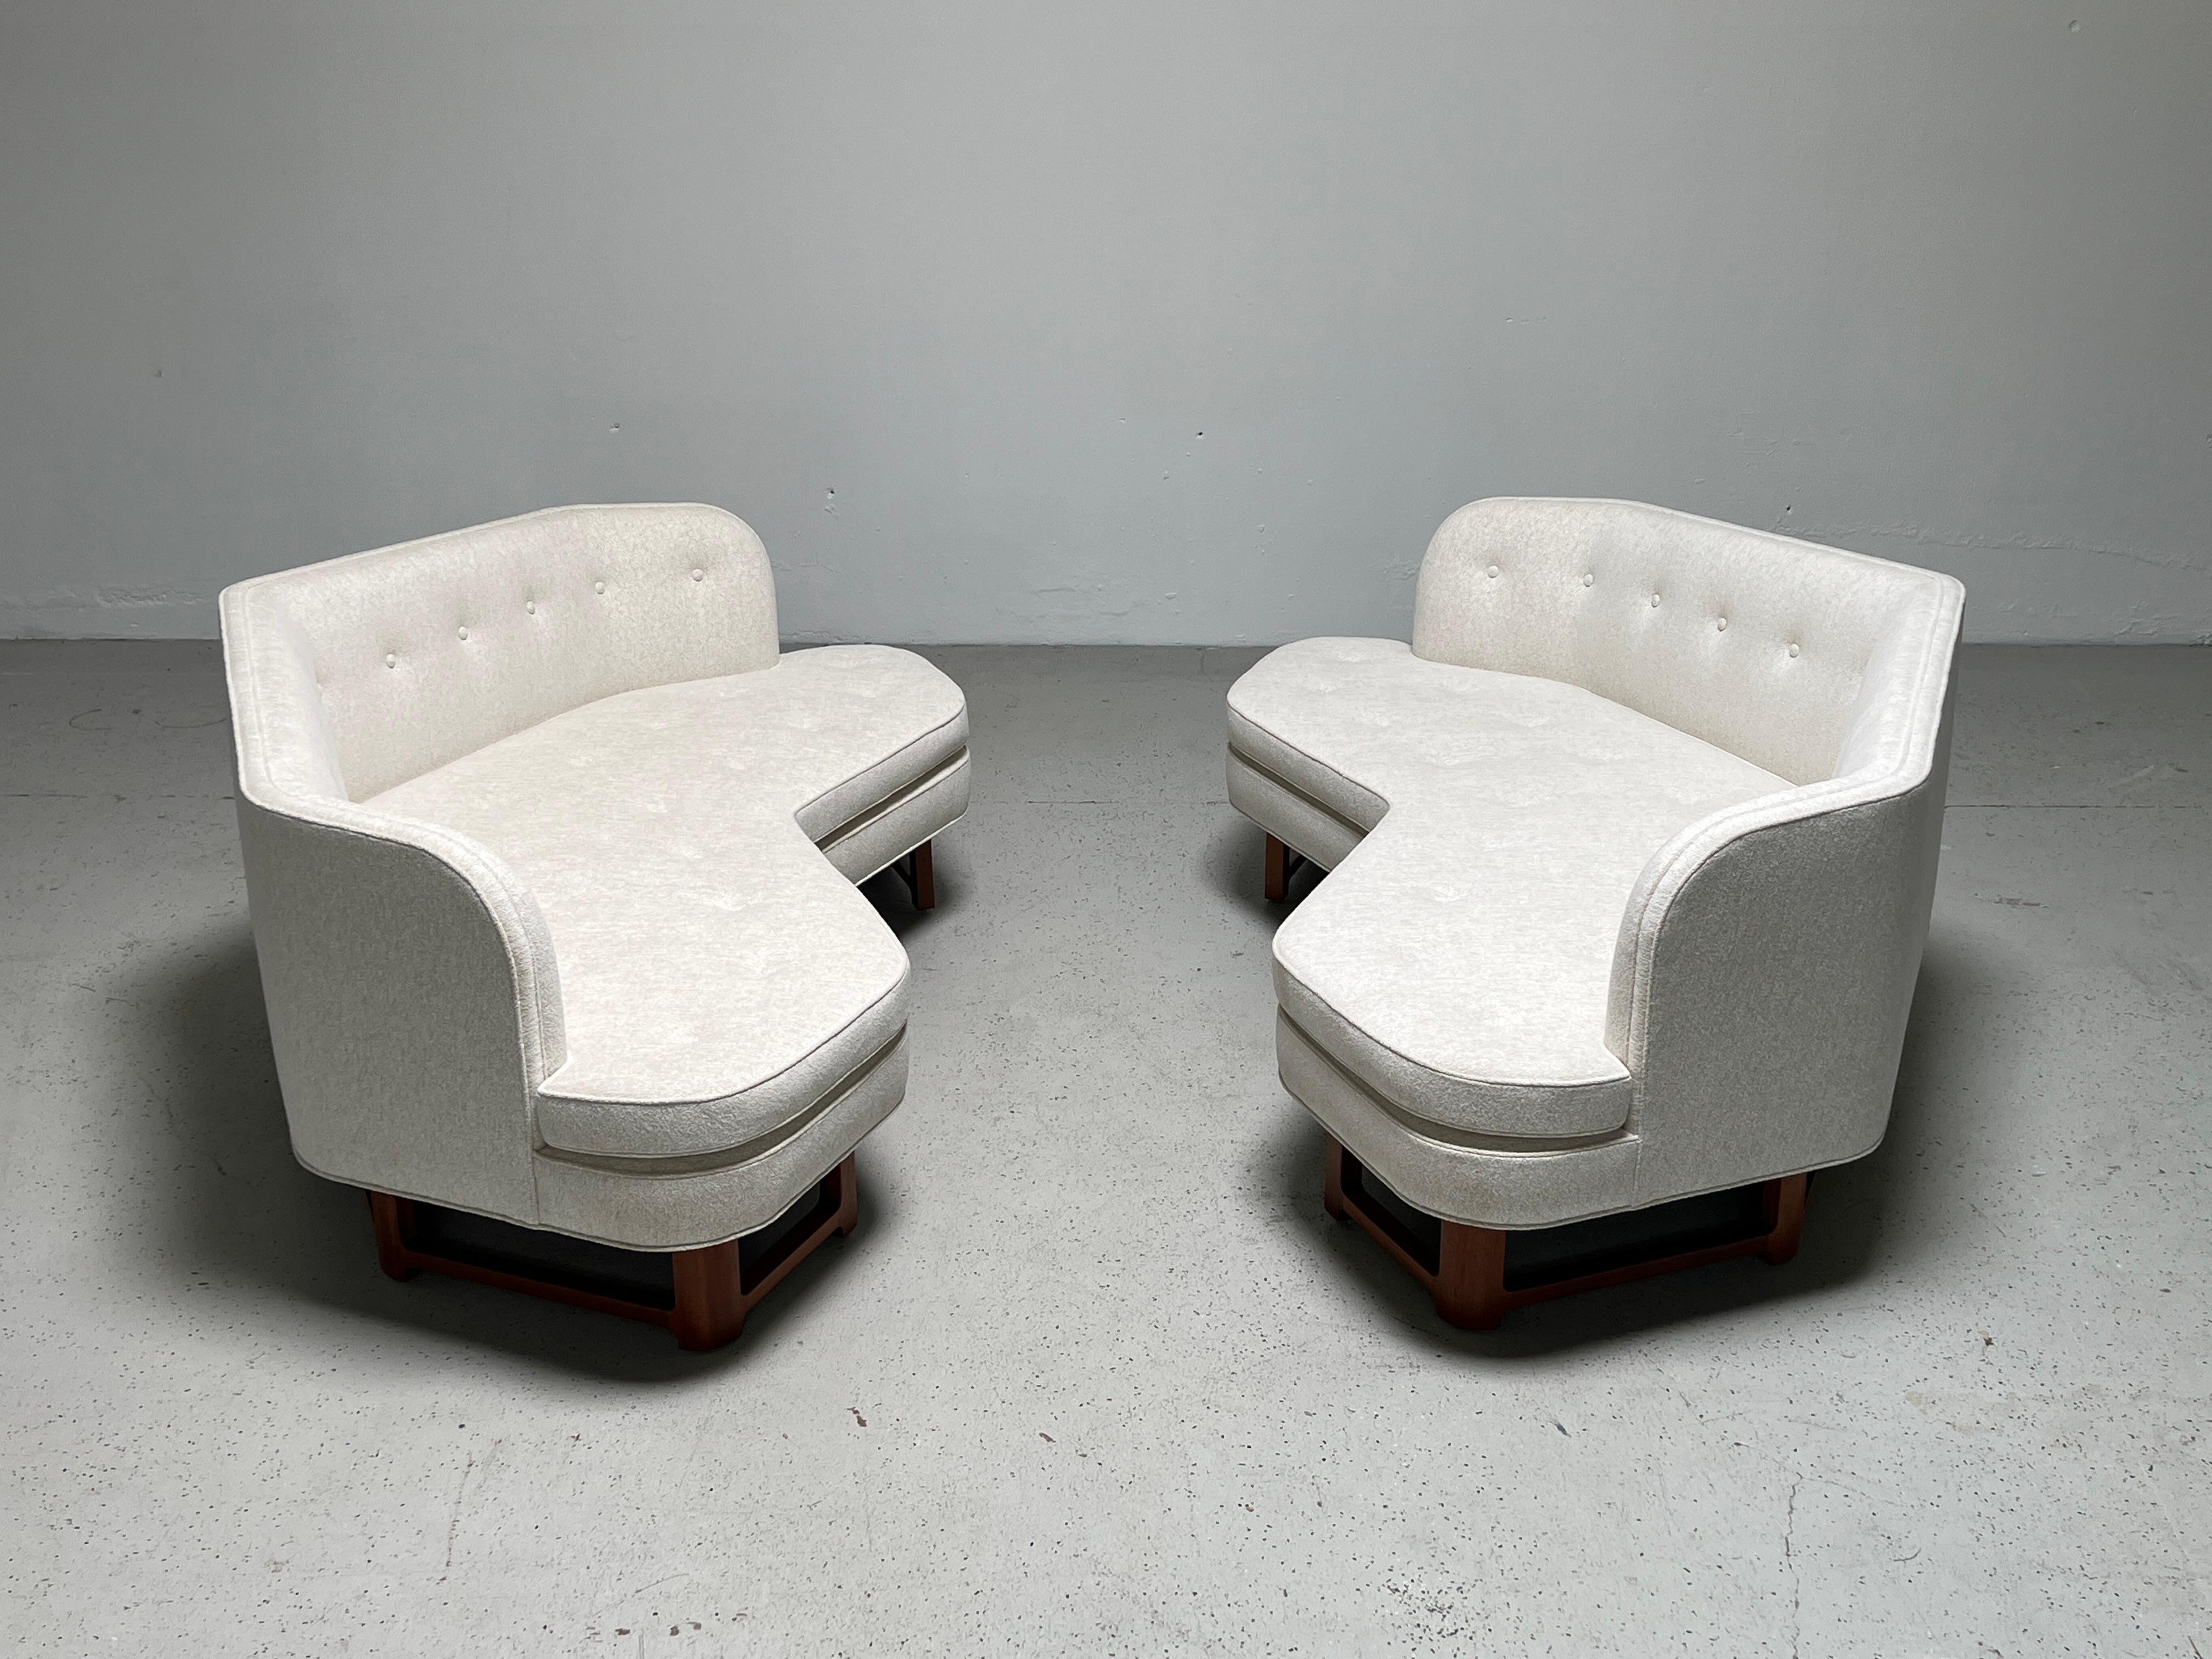 Fabric Pair of Angled Sofas by Edward Wormley for Dunbar